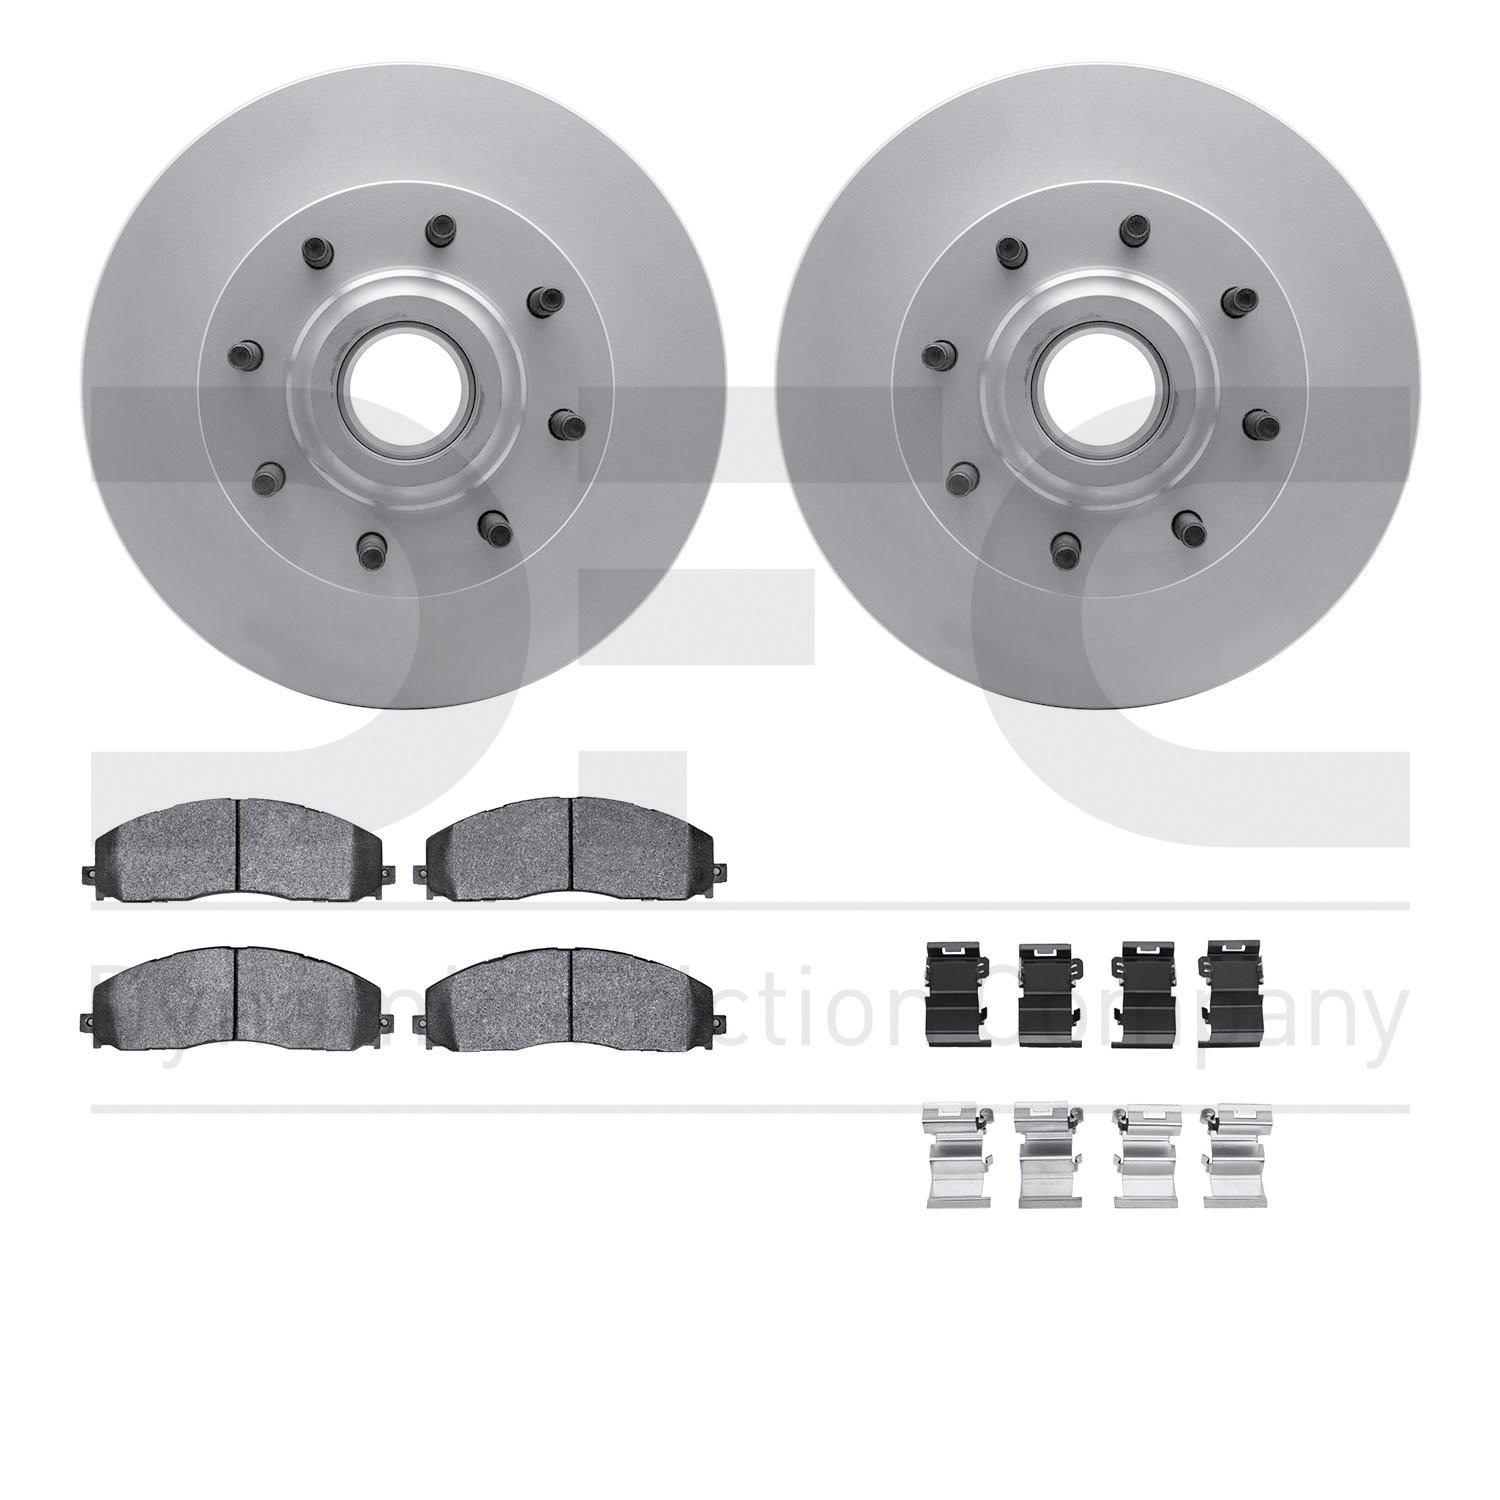 4412-54072 Geospec Brake Rotors with Ultimate-Duty Brake Pads & Hardware, Fits Select Ford/Lincoln/Mercury/Mazda, Position: Fron